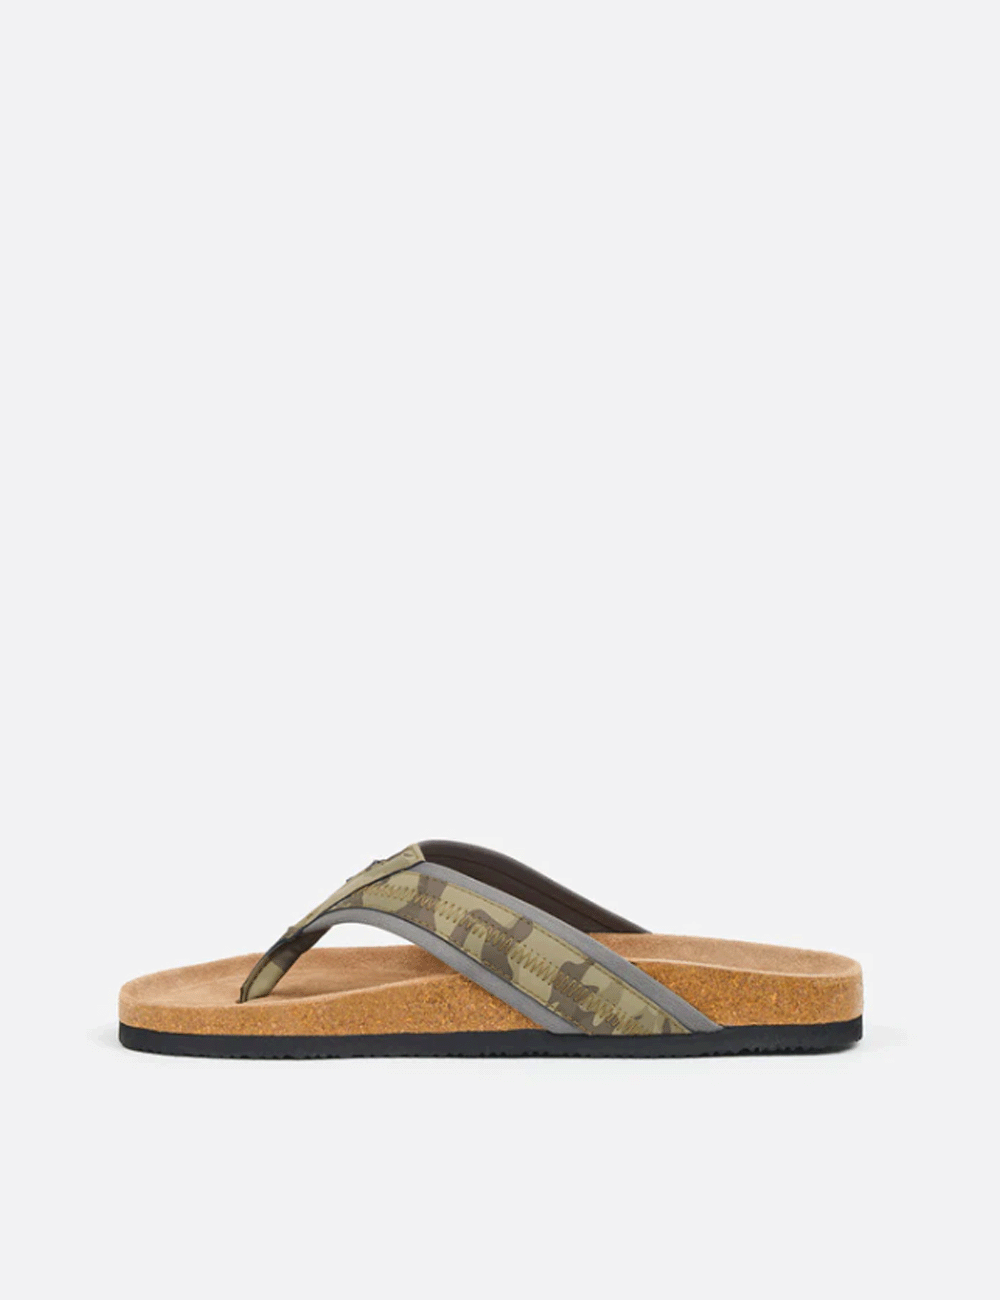 Outside of left foot of the Camo Flip Flops